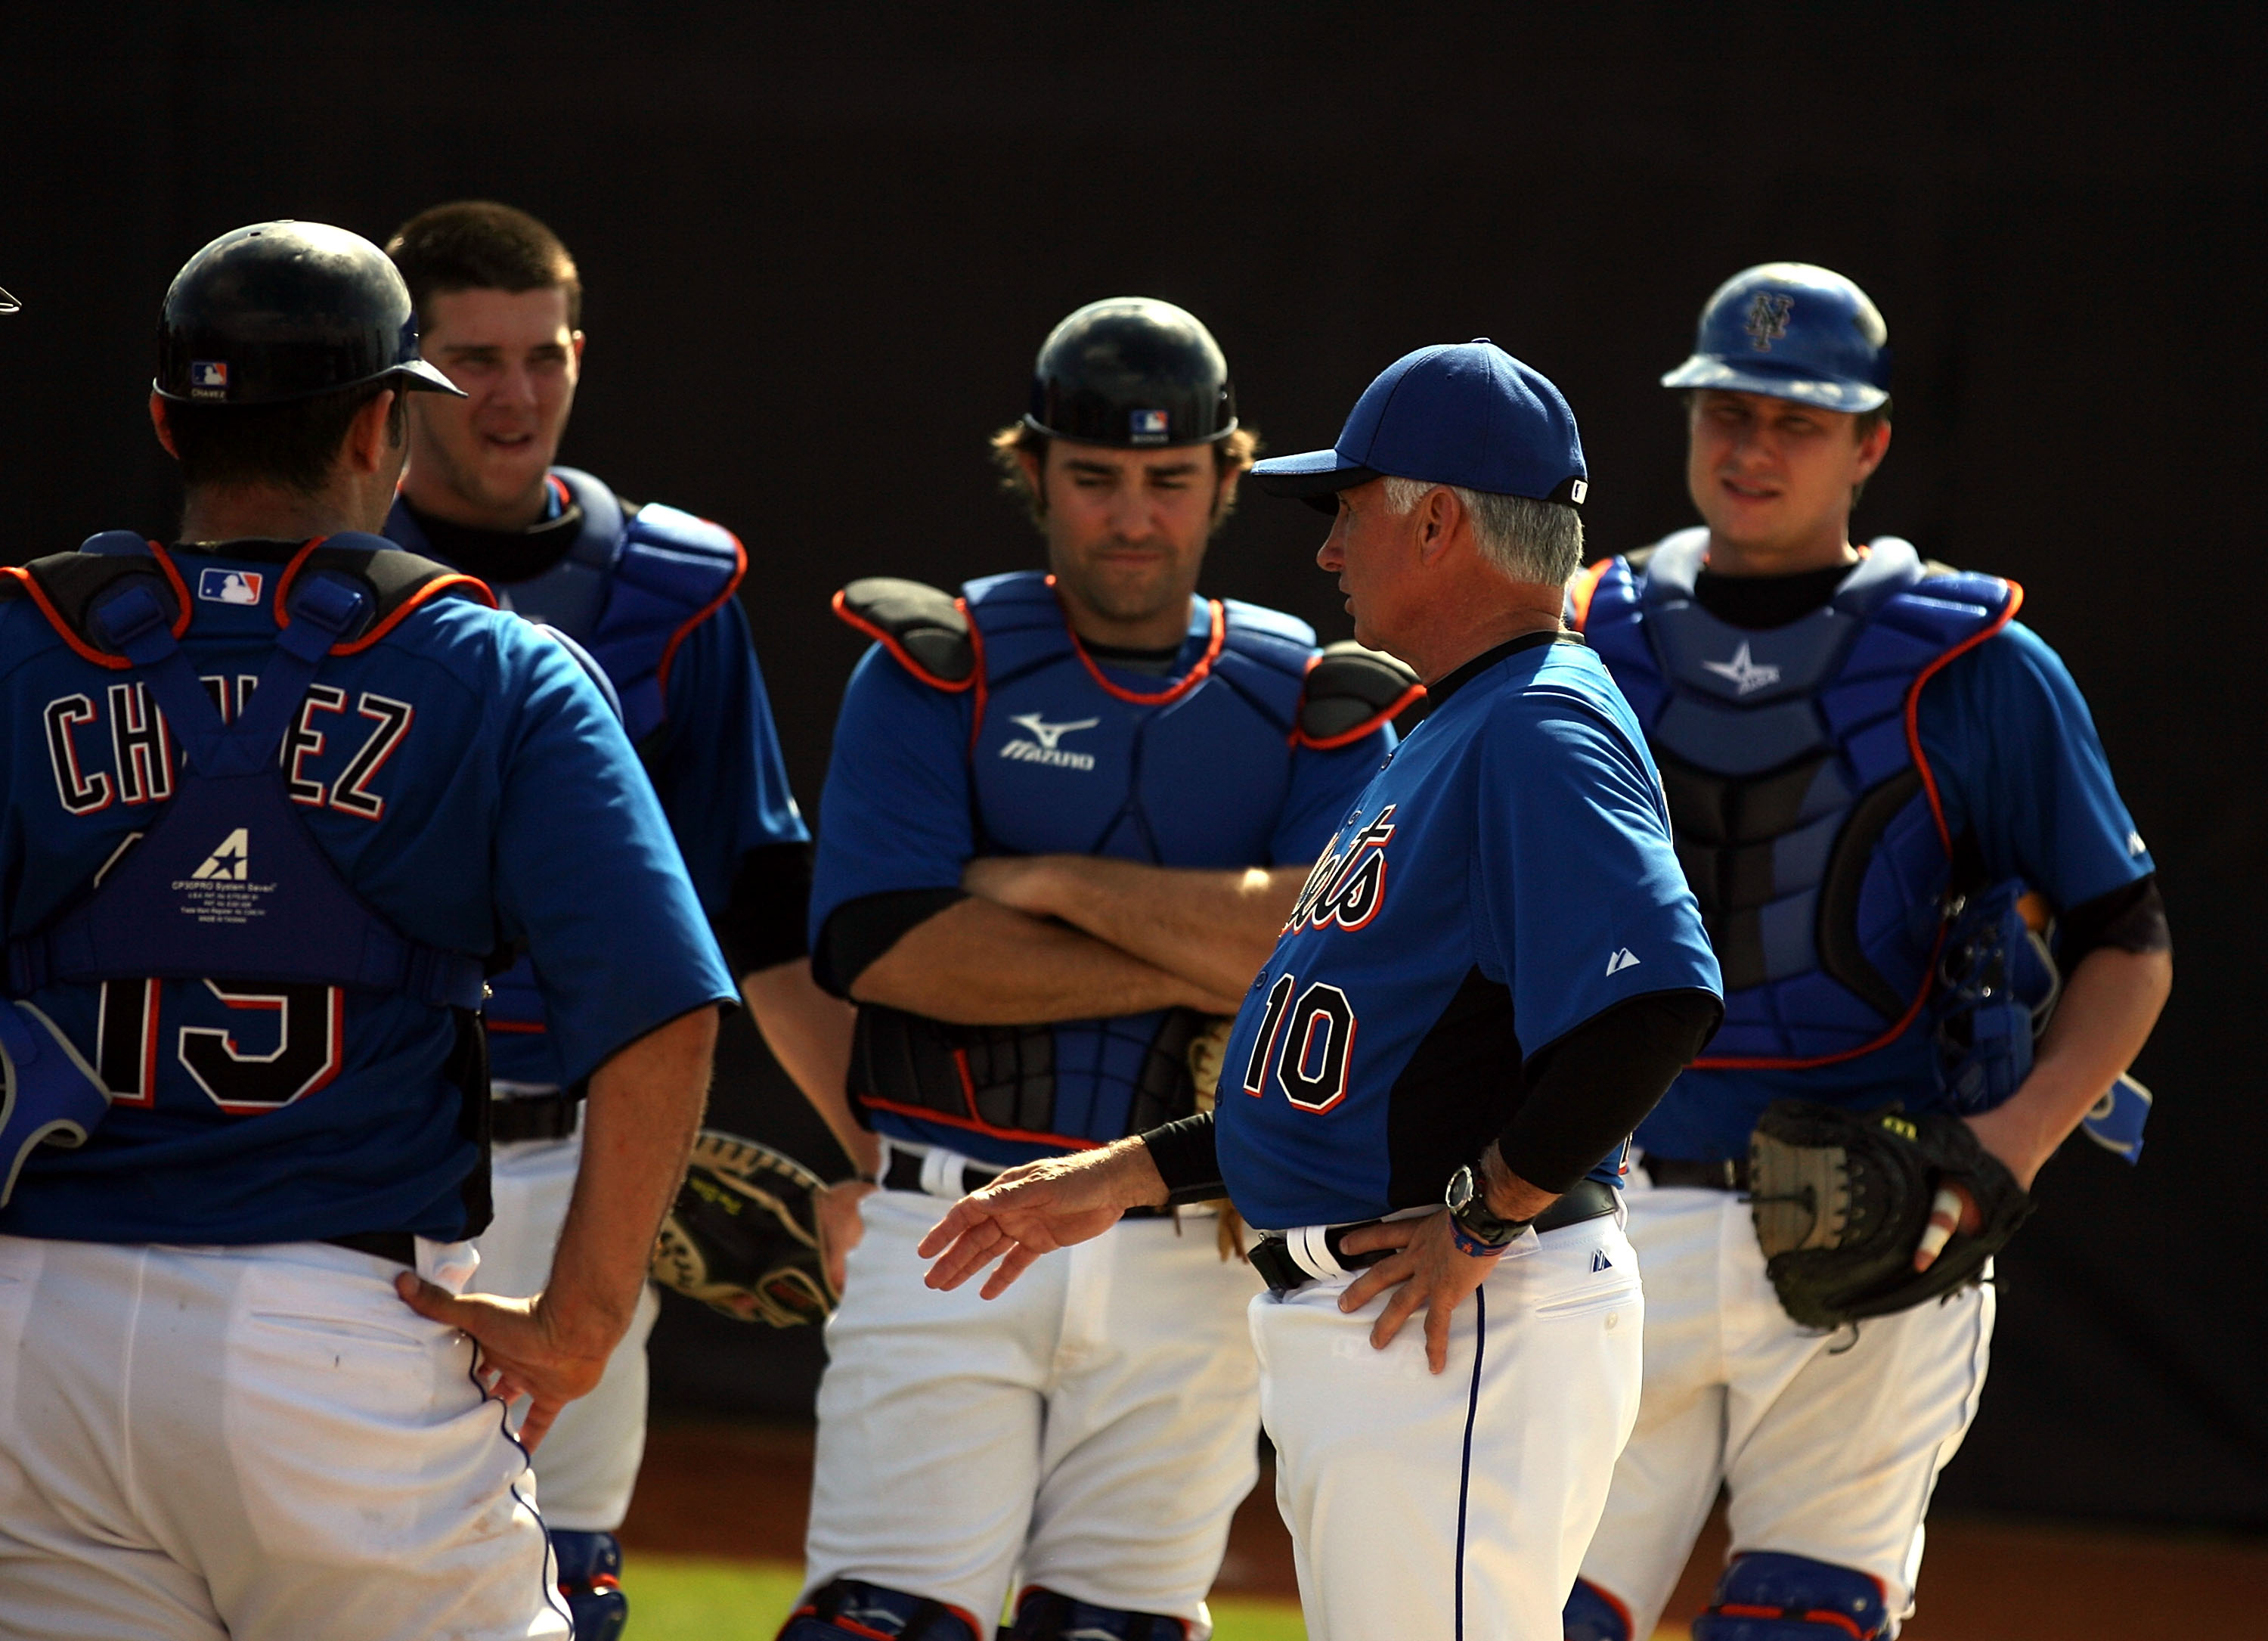 PORT ST. LUCIE, FL - FEBRUARY 17:  Manager terry Collins #10 of the New York Mets addresses his team during spring training at Tradition Field on February 17, 2011 in Port St. Lucie, Florida.  (Photo by Marc Serota/Getty Images)